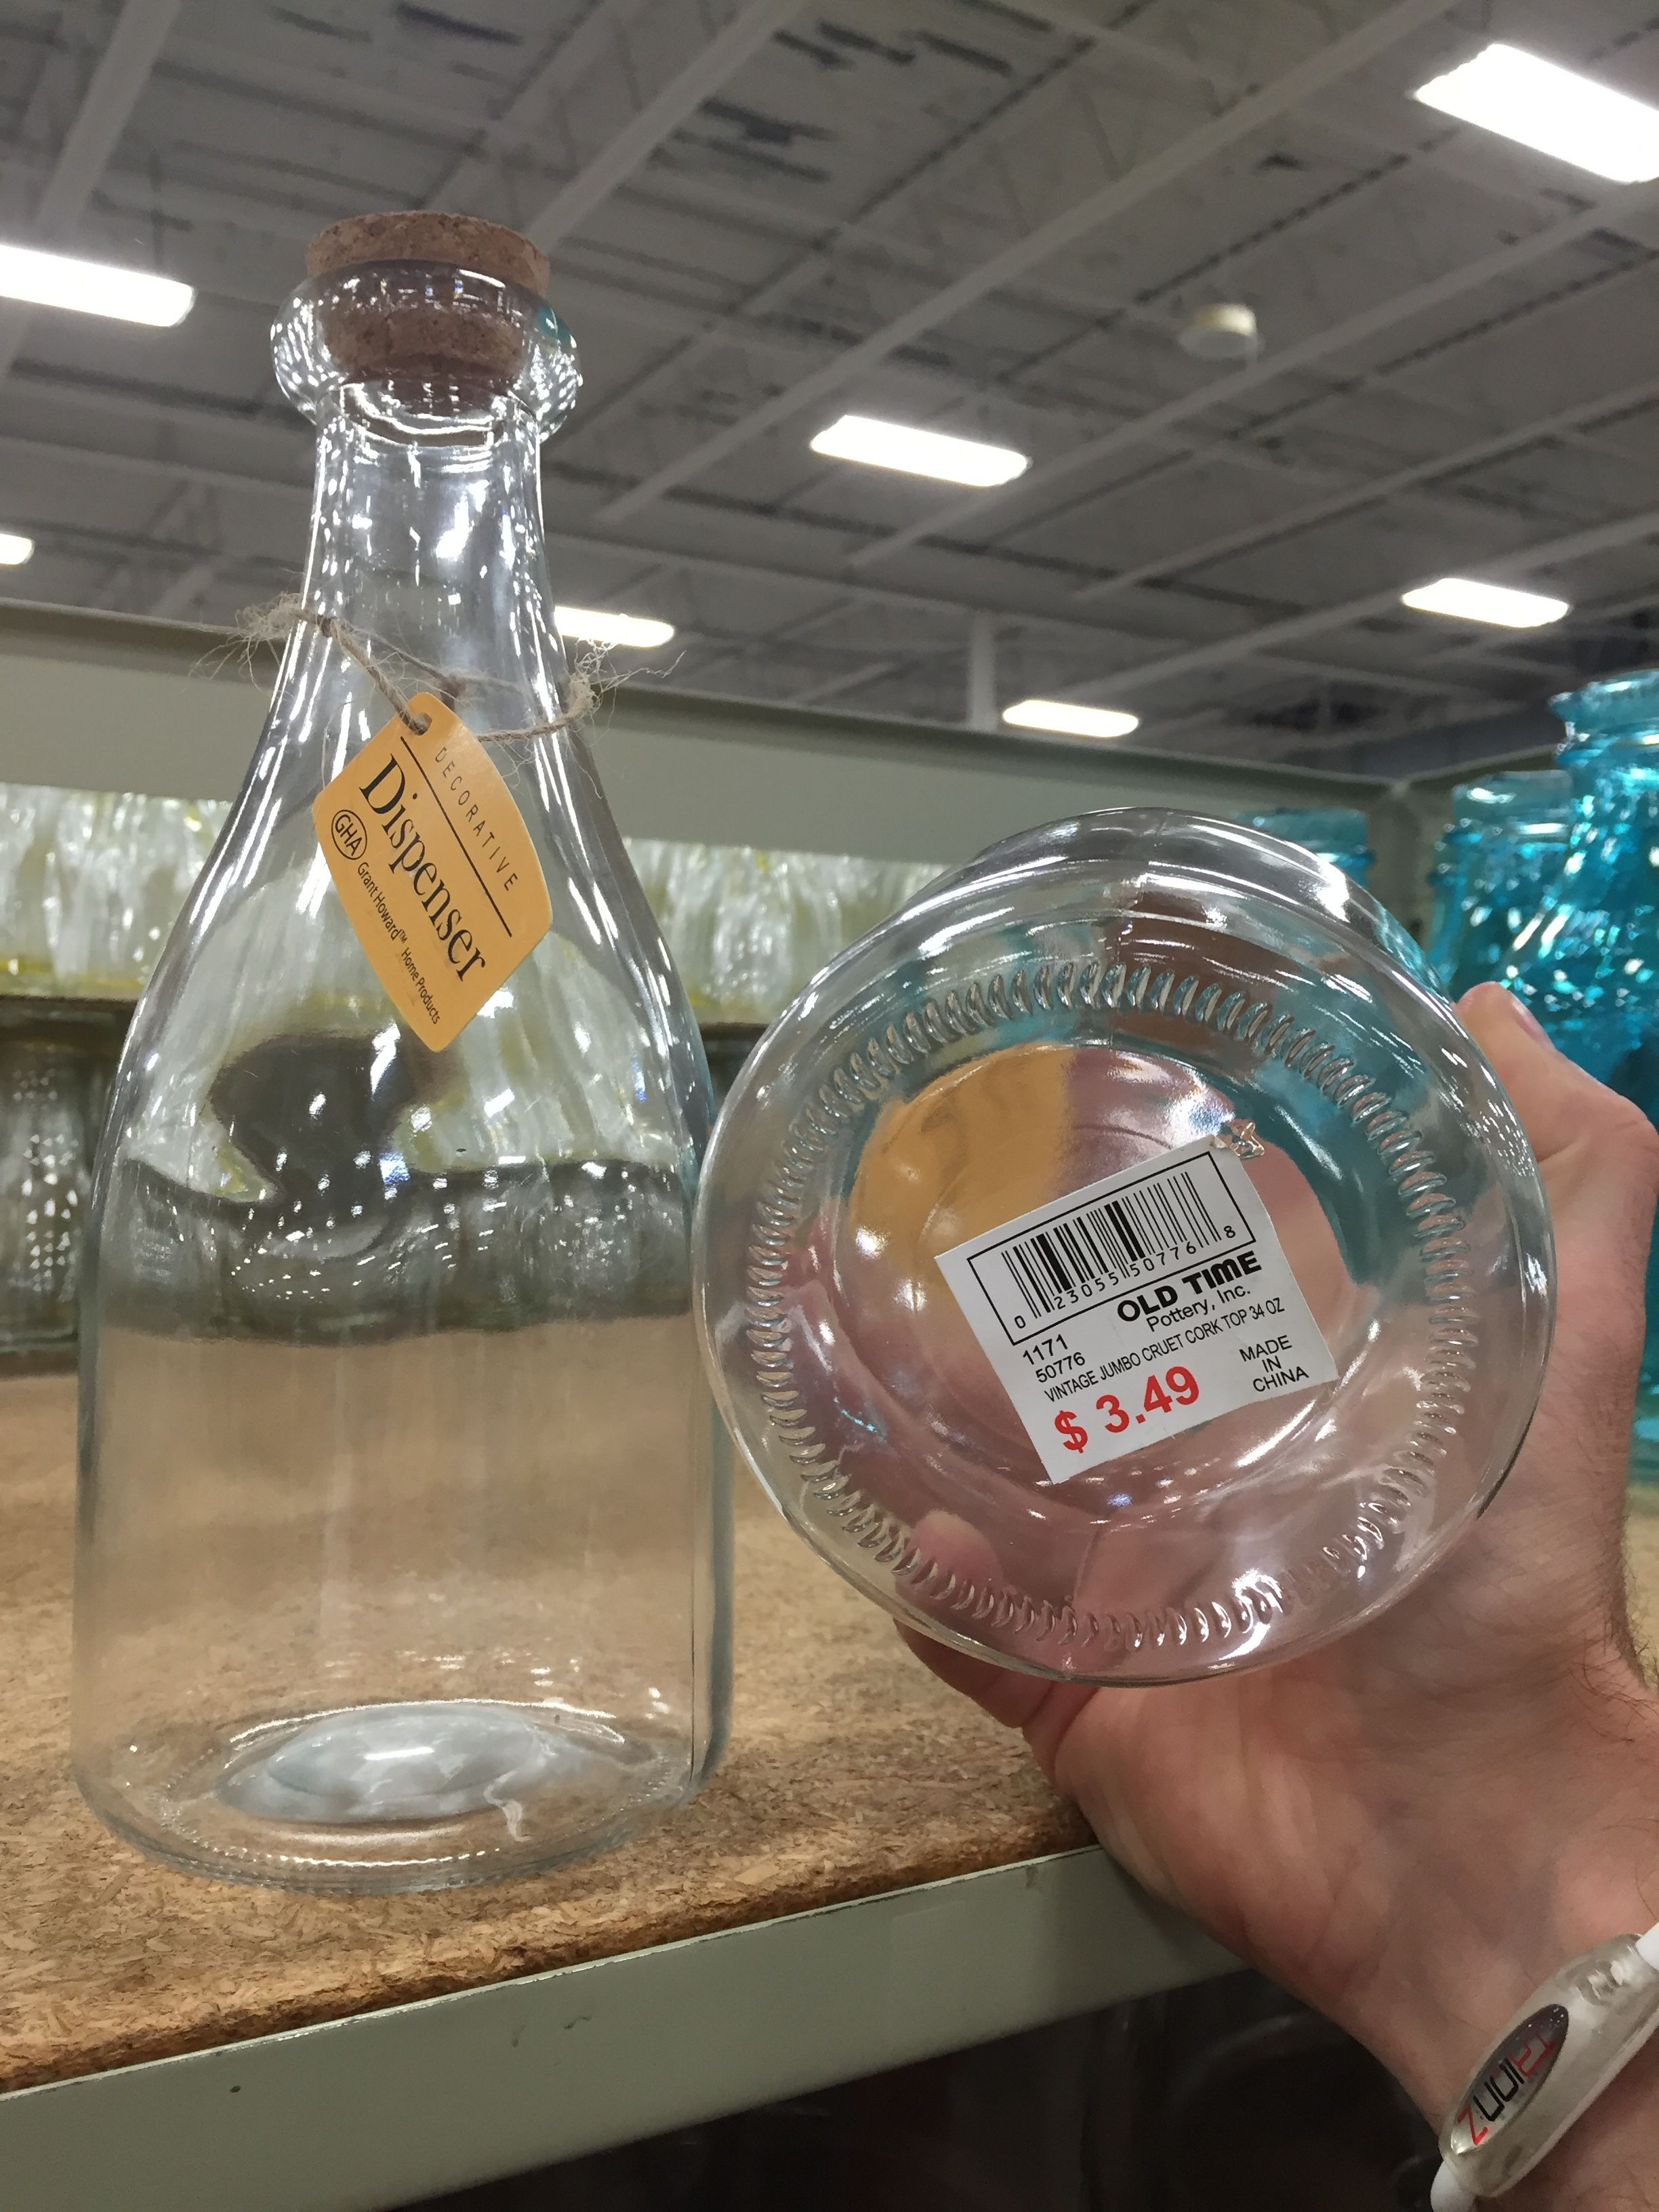 15 Wonderful Old Time Pottery Glass Vases 2023 free download old time pottery glass vases of messages in a bottle with heavy stock paper instead of a guest in messages in a bottle with heavy stock paper instead of a guest signing book for reception